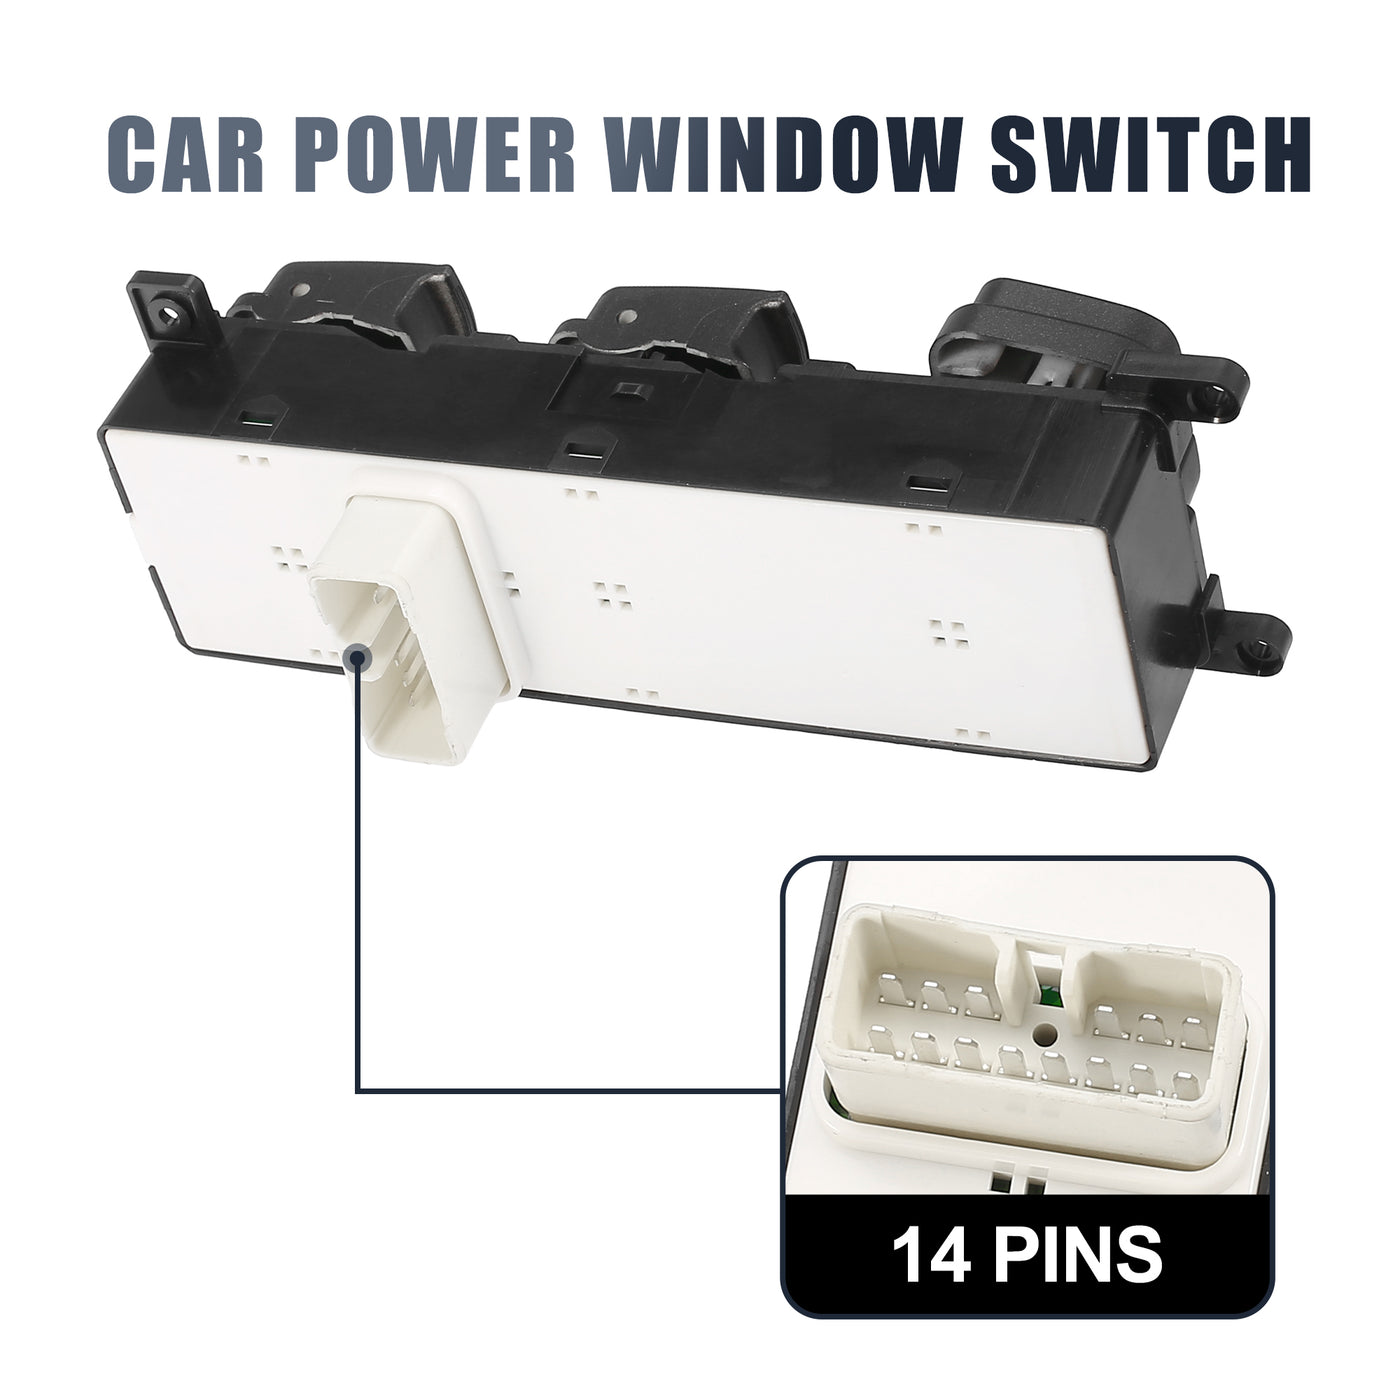 X AUTOHAUX Master Driver Side Power Window Switch 93570-3K600 Replacement for Hyundai Sonata 2008-2010